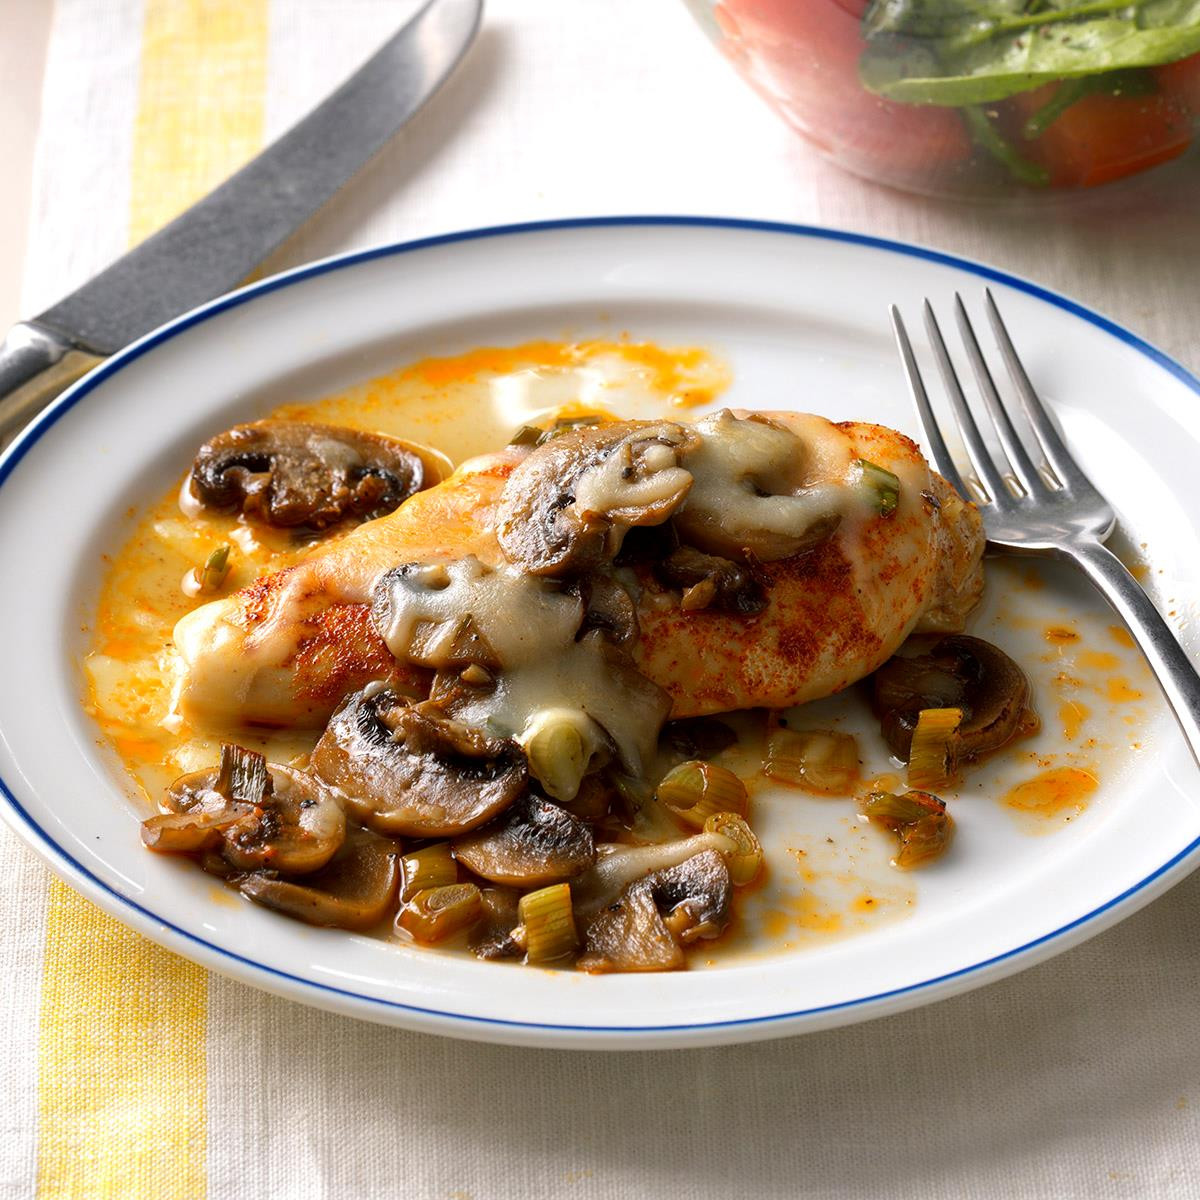 Baked Chicken Breast With Mushrooms
 Baked Chicken and Mushrooms Recipe